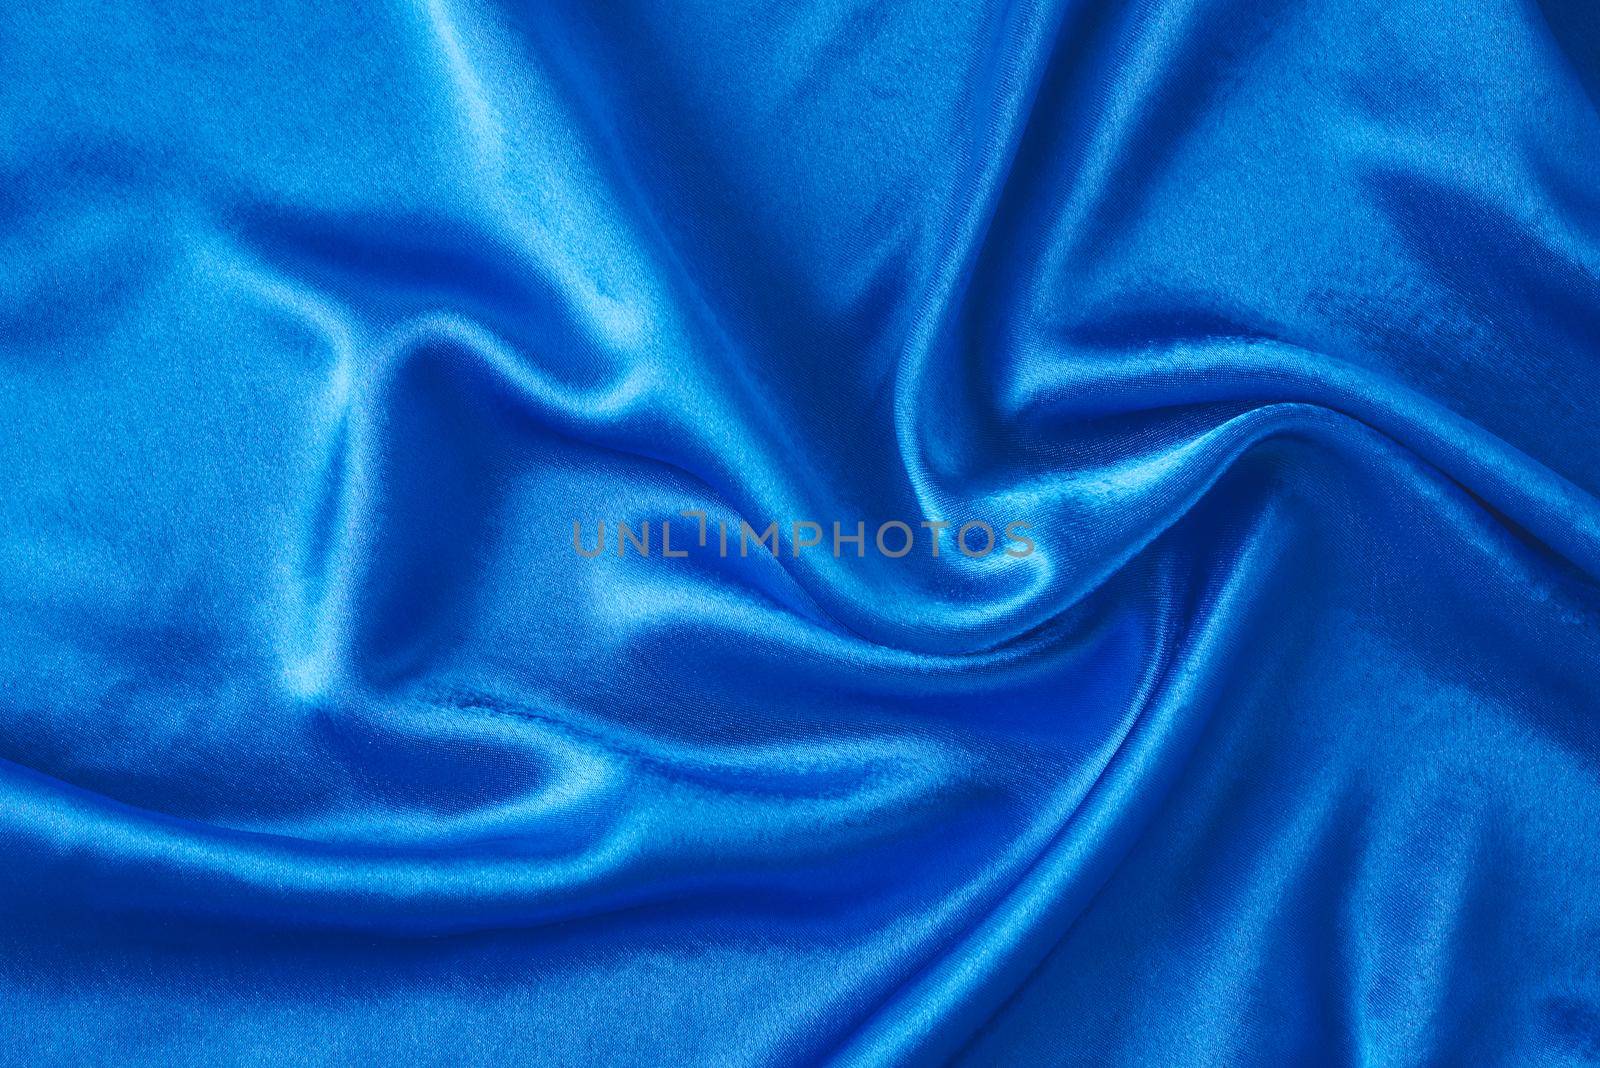 Blue silk background with a folds. Abstract texture of rippled satin surface by Lazy_Bear